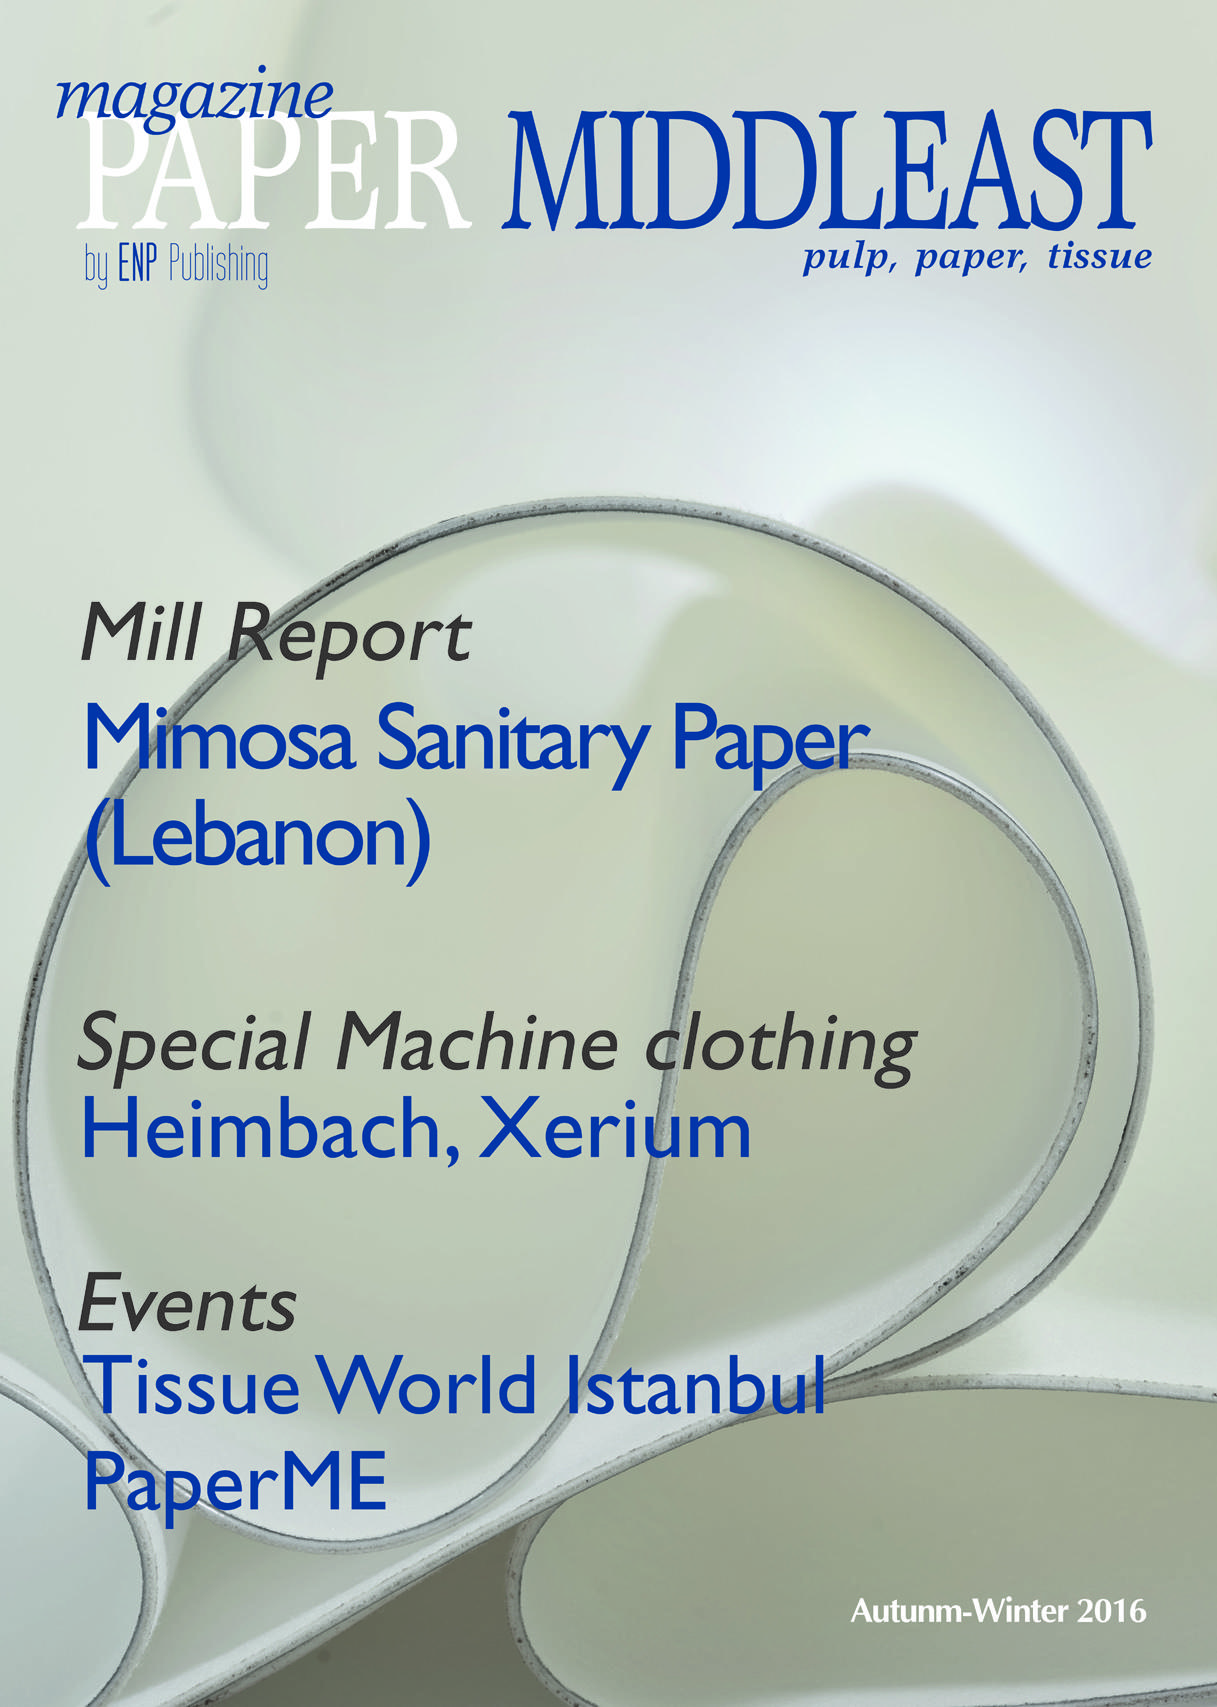 Paper Middleast magazine